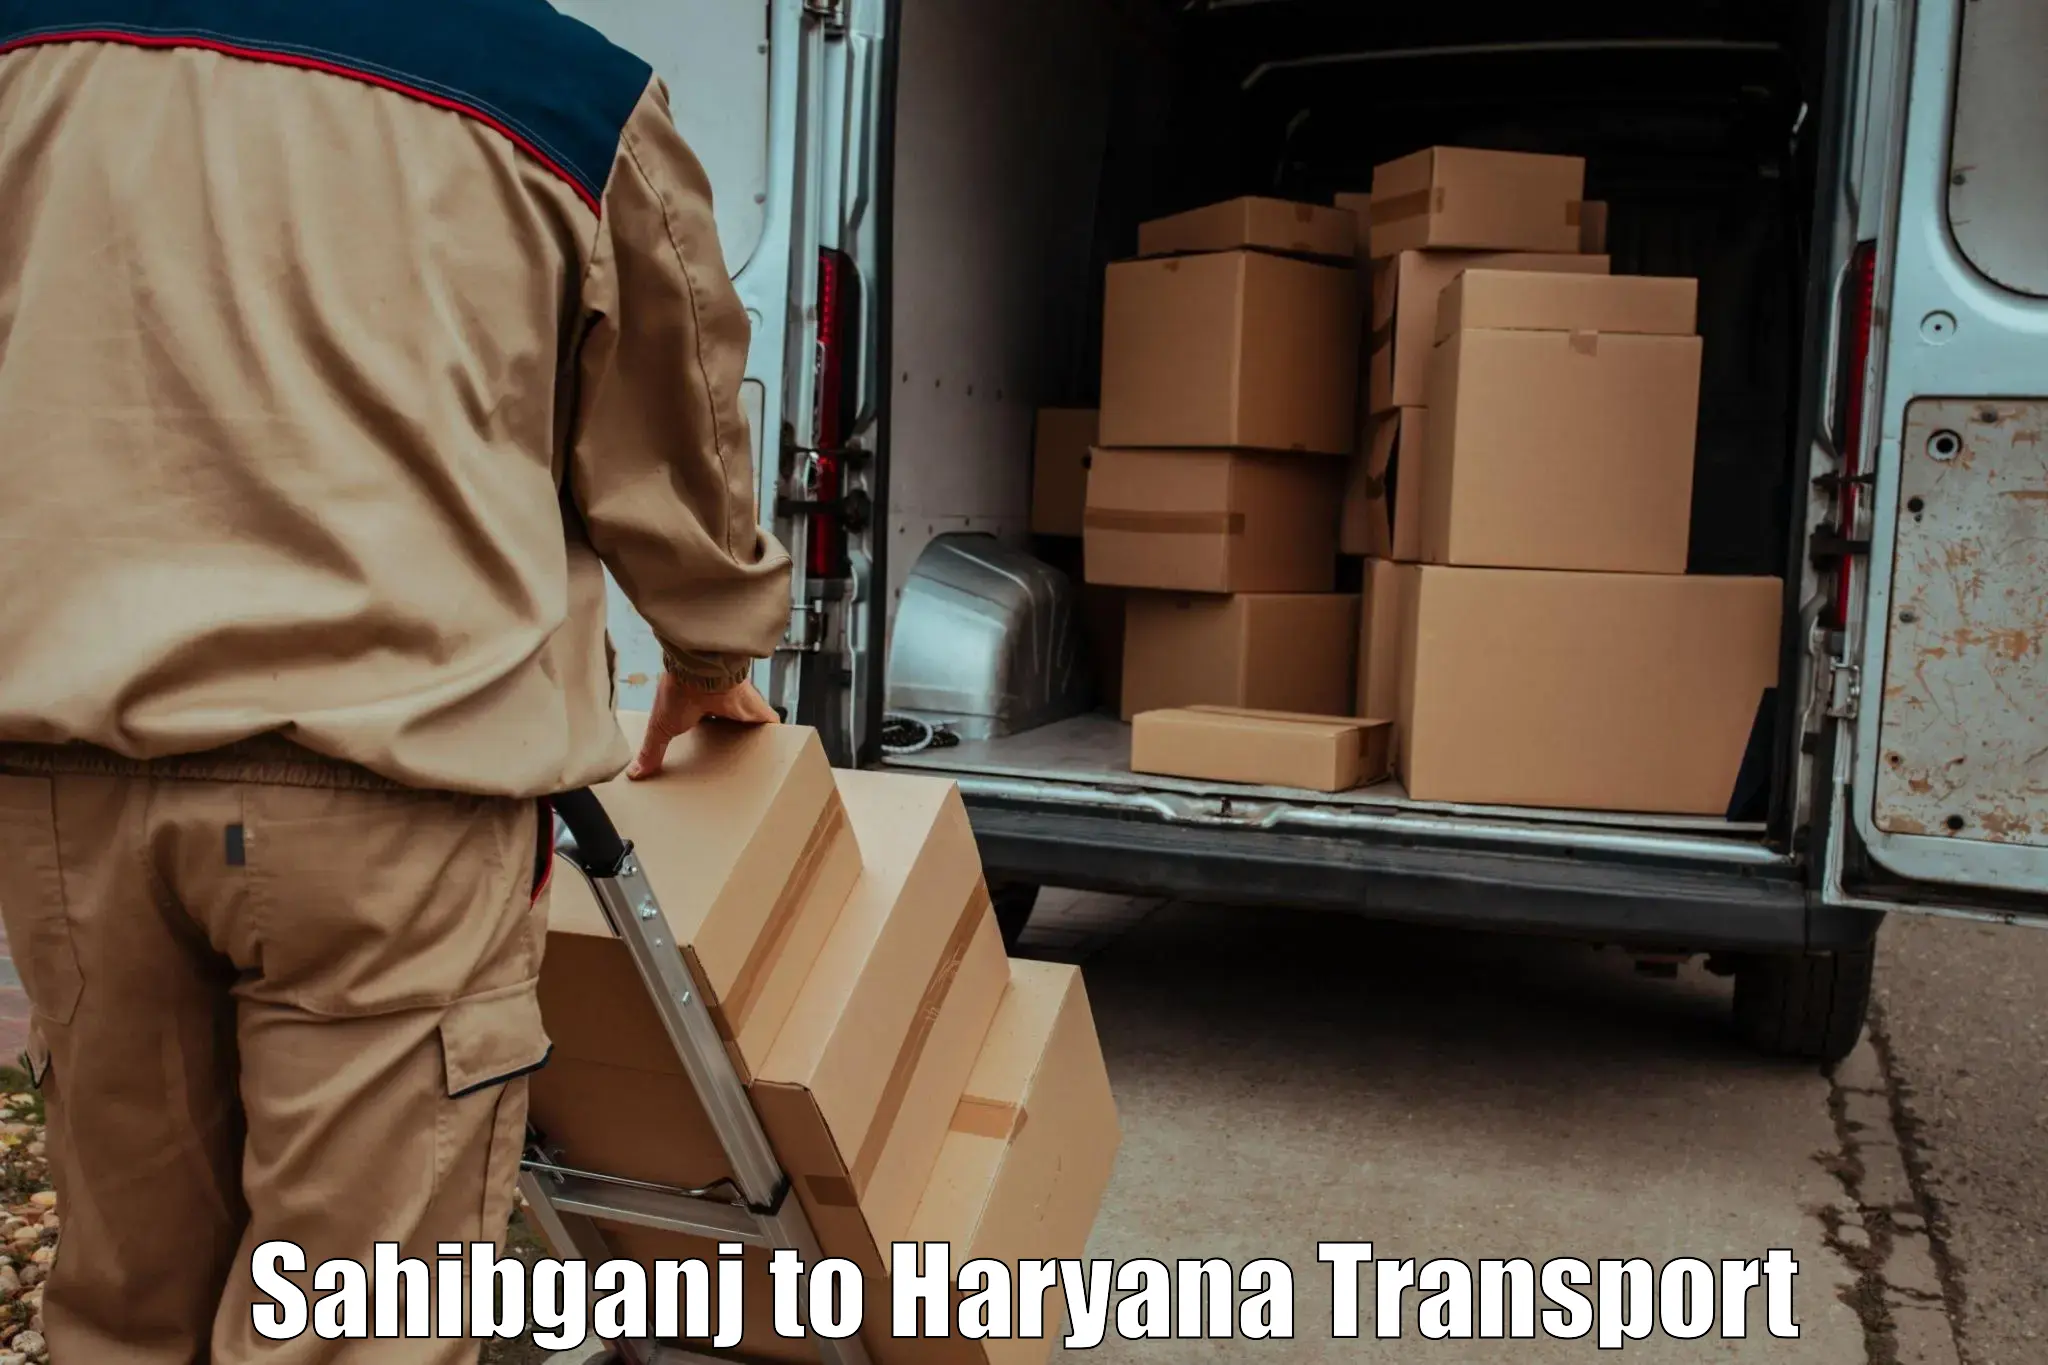 Transport bike from one state to another Sahibganj to NCR Haryana